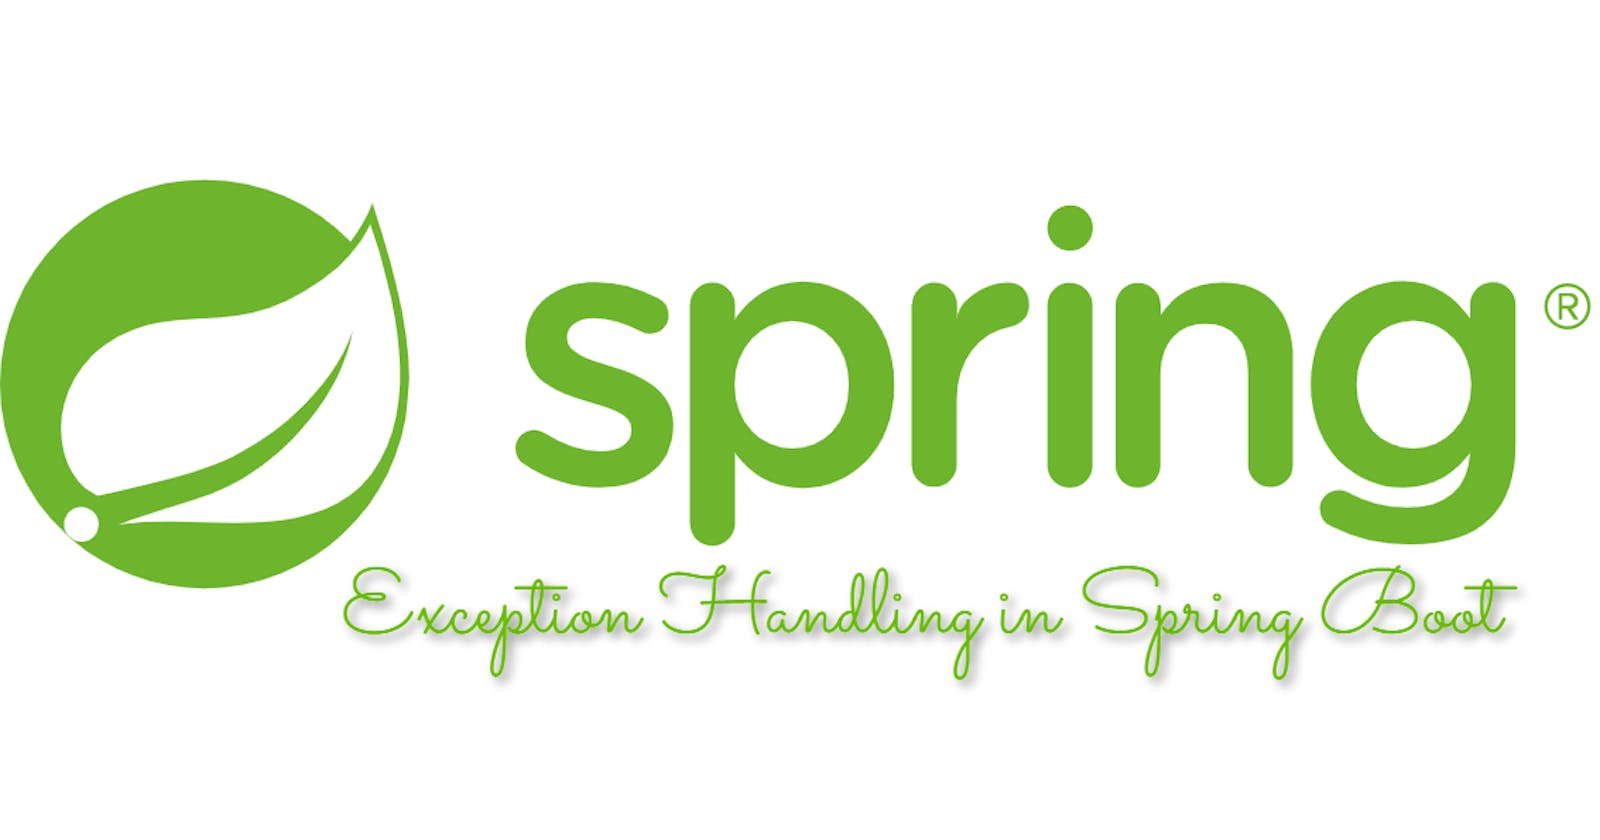 Exception Handling in Spring Boot